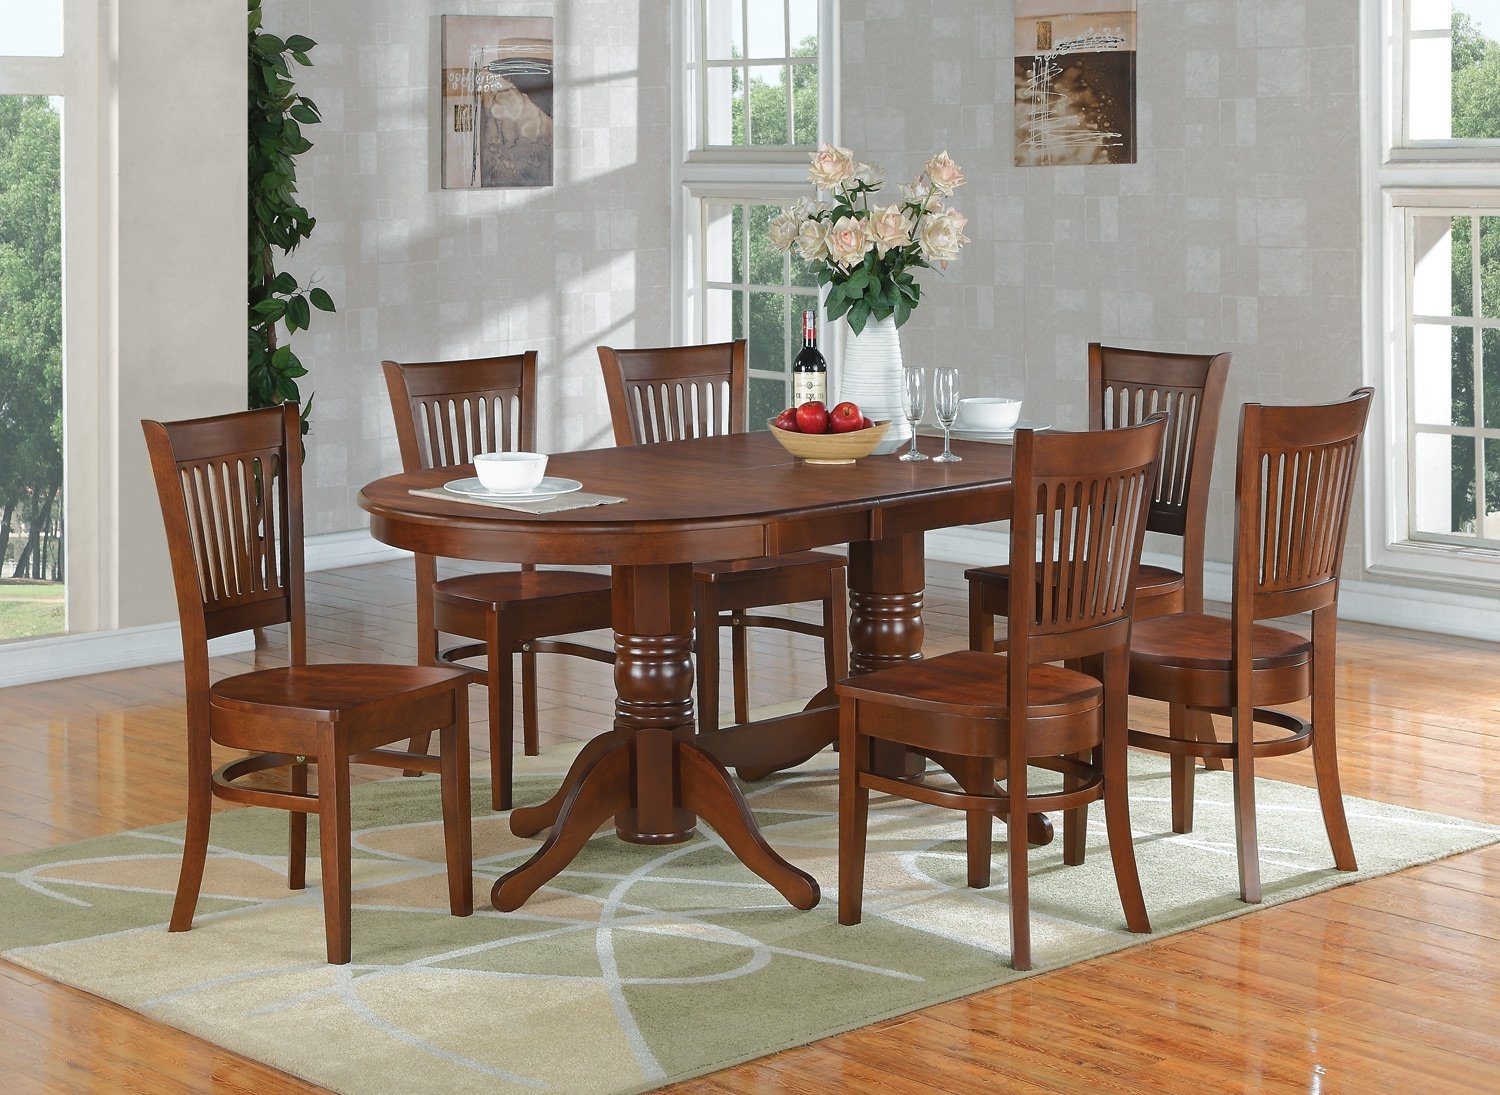 East West Furniture VANC7-ESP-W Vancouver 7PC set with double pedestal oval featured 17 in. butterfly leaf and 6 wood seat chairs